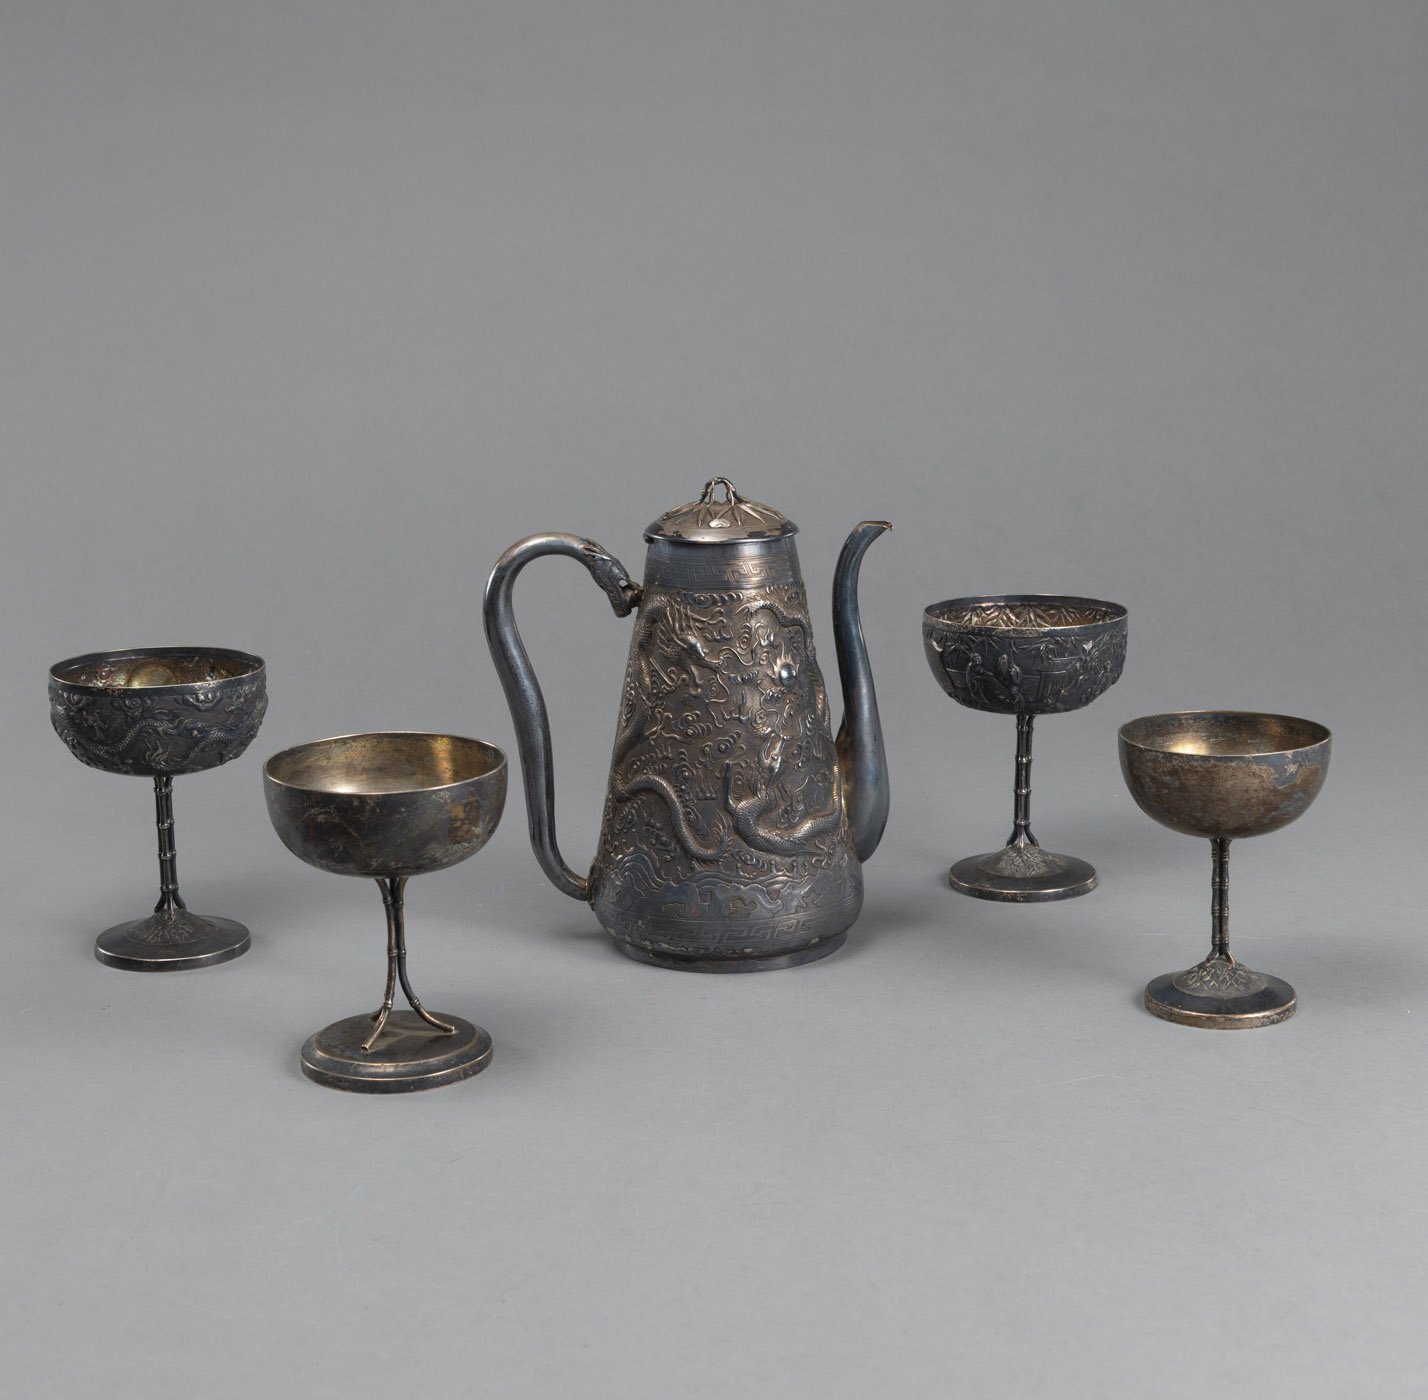 <b>A FIGURAL RELIEF SILVER EWER AND FOUR SILVER STEM CUPS</b>